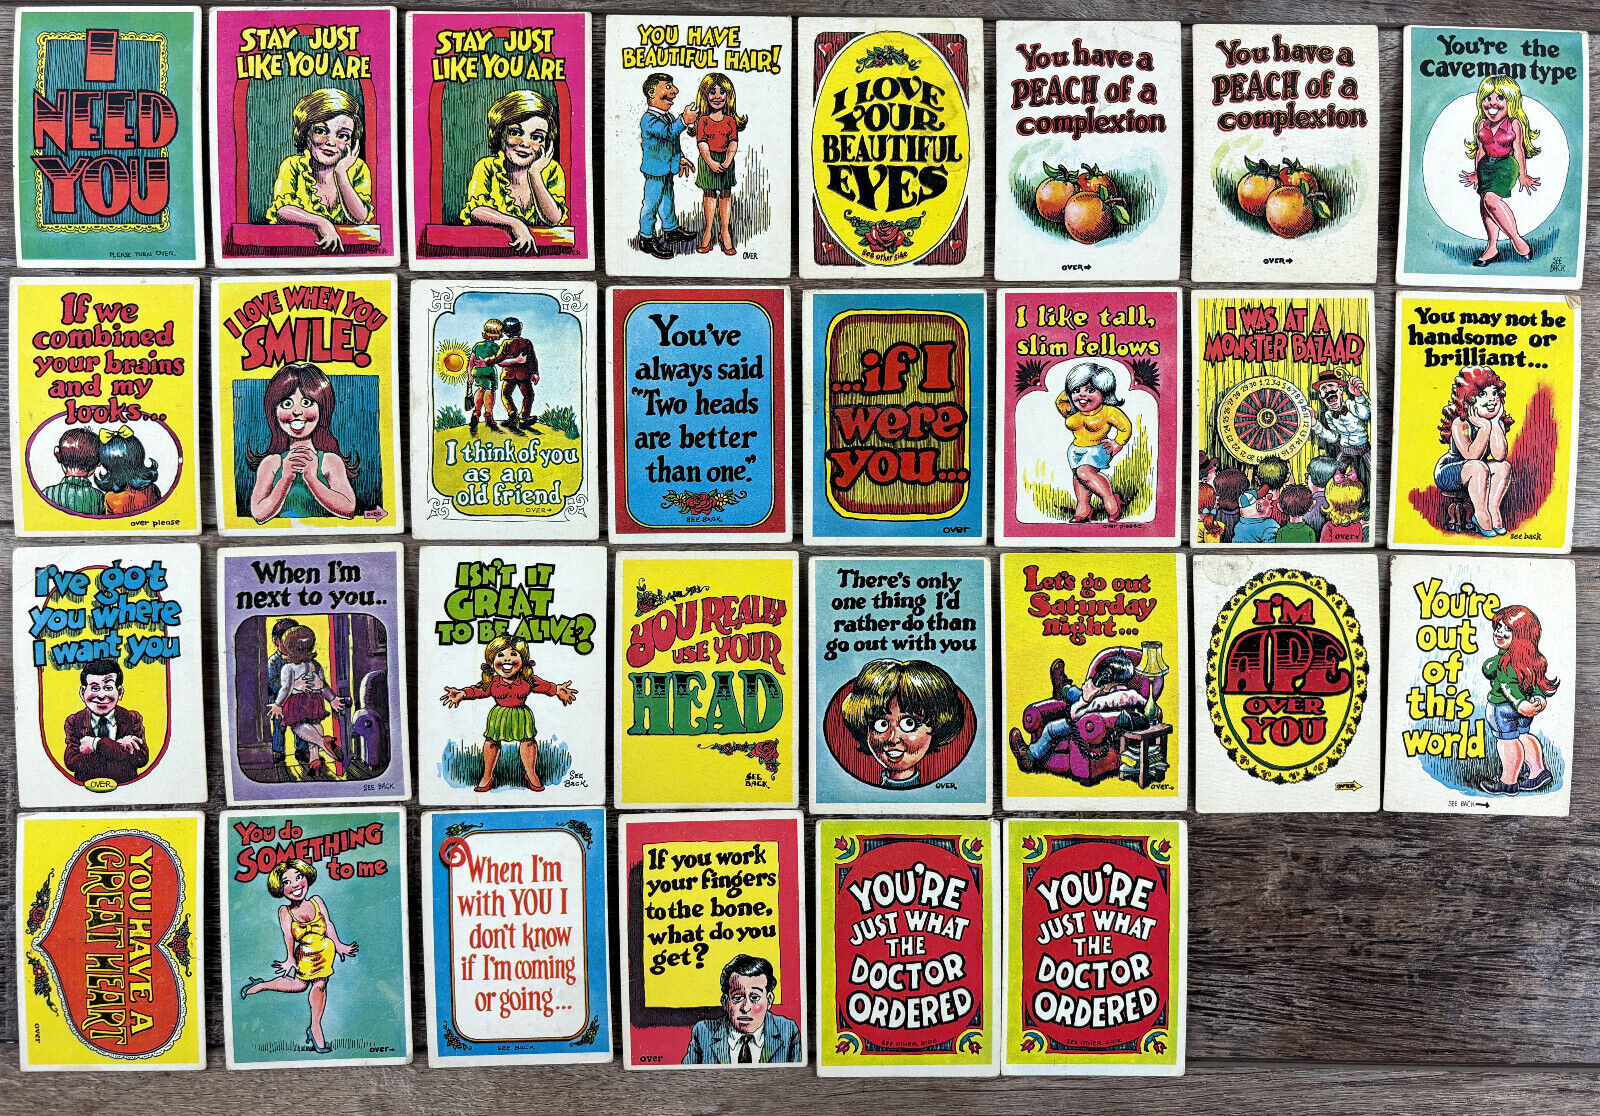 1965 Topps Monster Greeting Trading Card Lot of 30 (27 Diff.) - Poor - VG